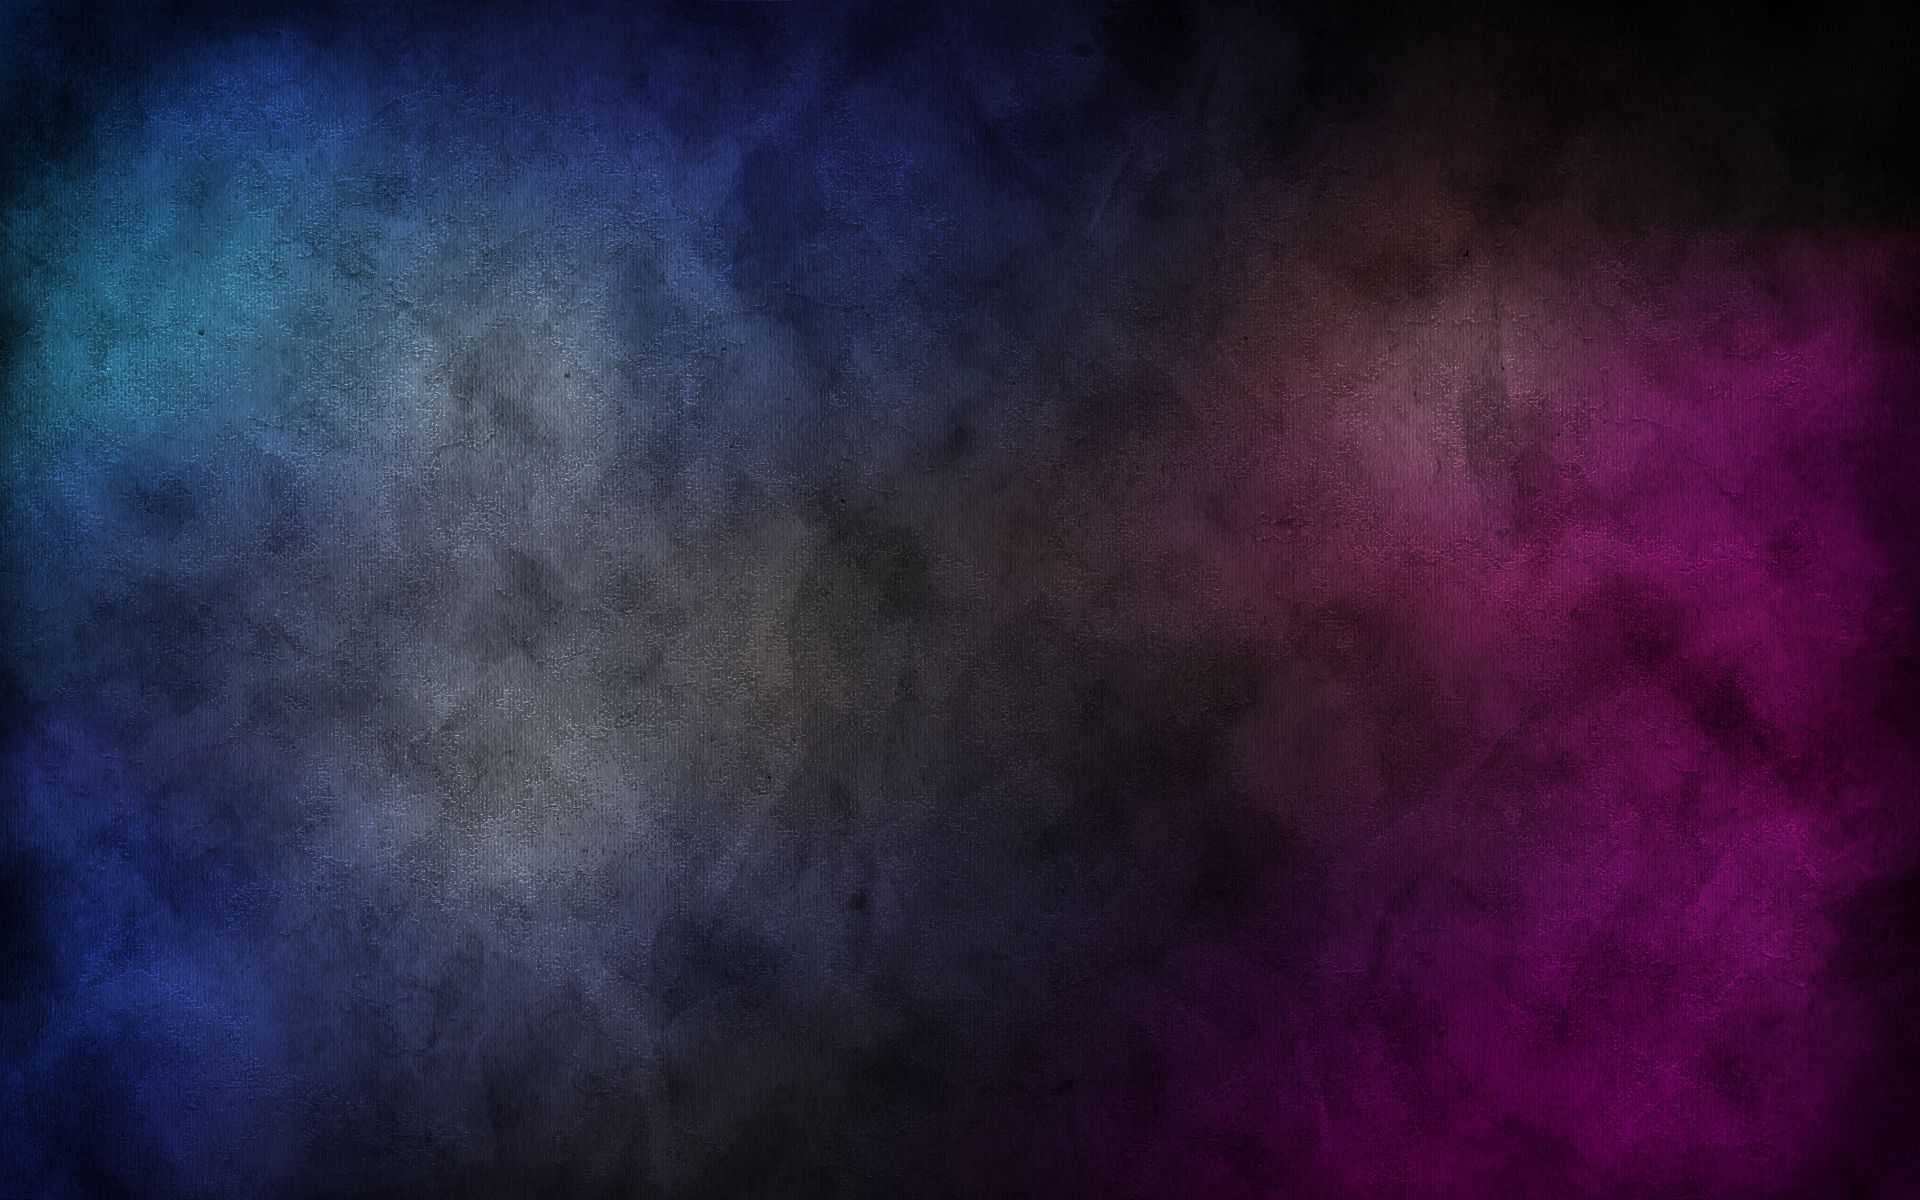 Free HD textures, texture, background, shadow, stains, spots